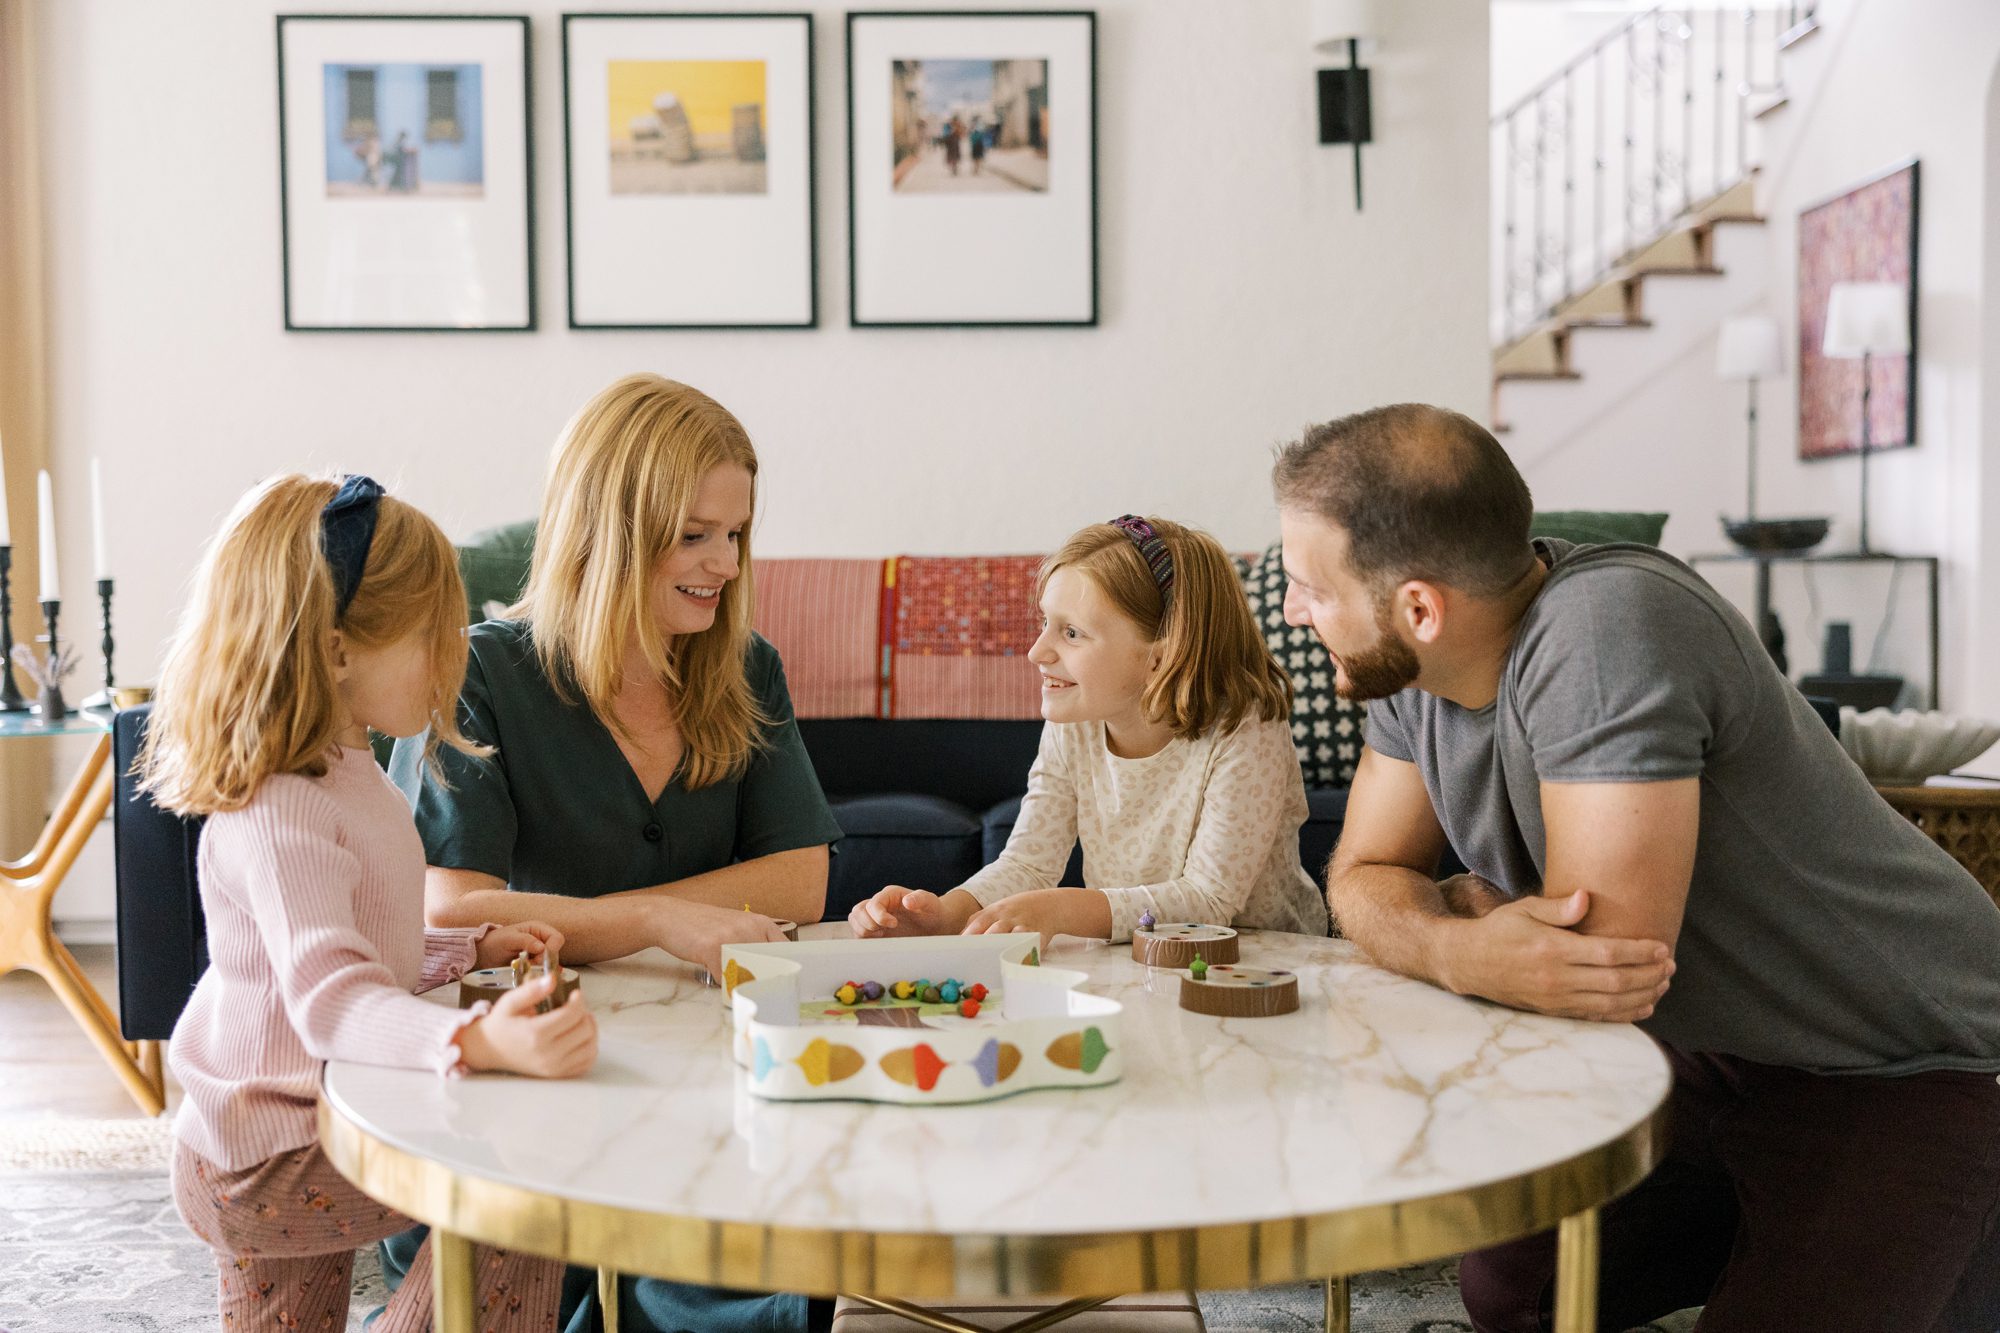 The family played games together during the Chicago home lifestyle photos